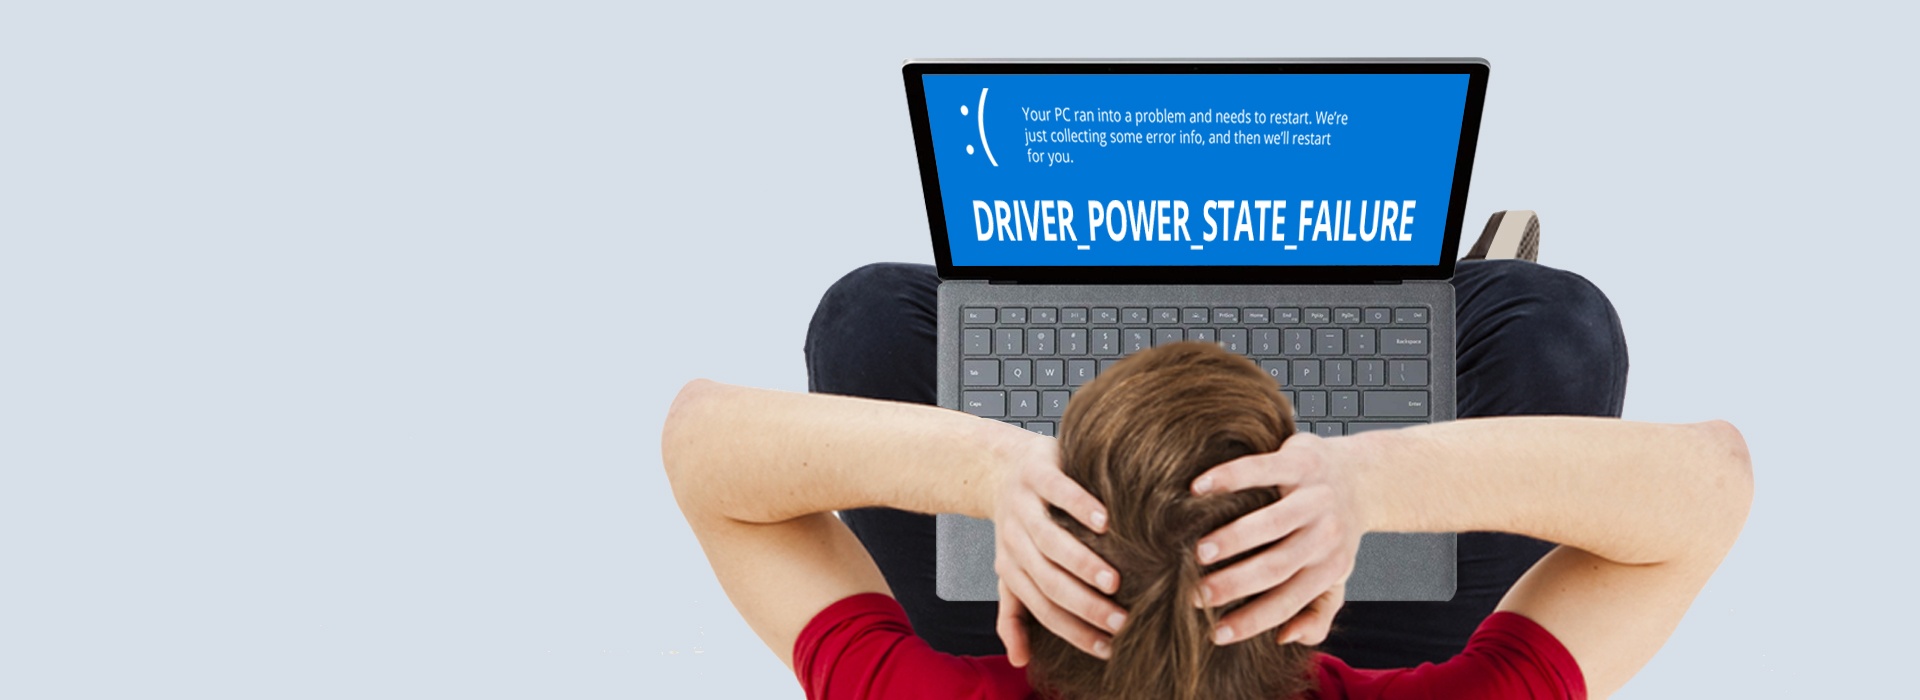 How to Fix Driver Power State Failure on Windows 10 - Driver Easy